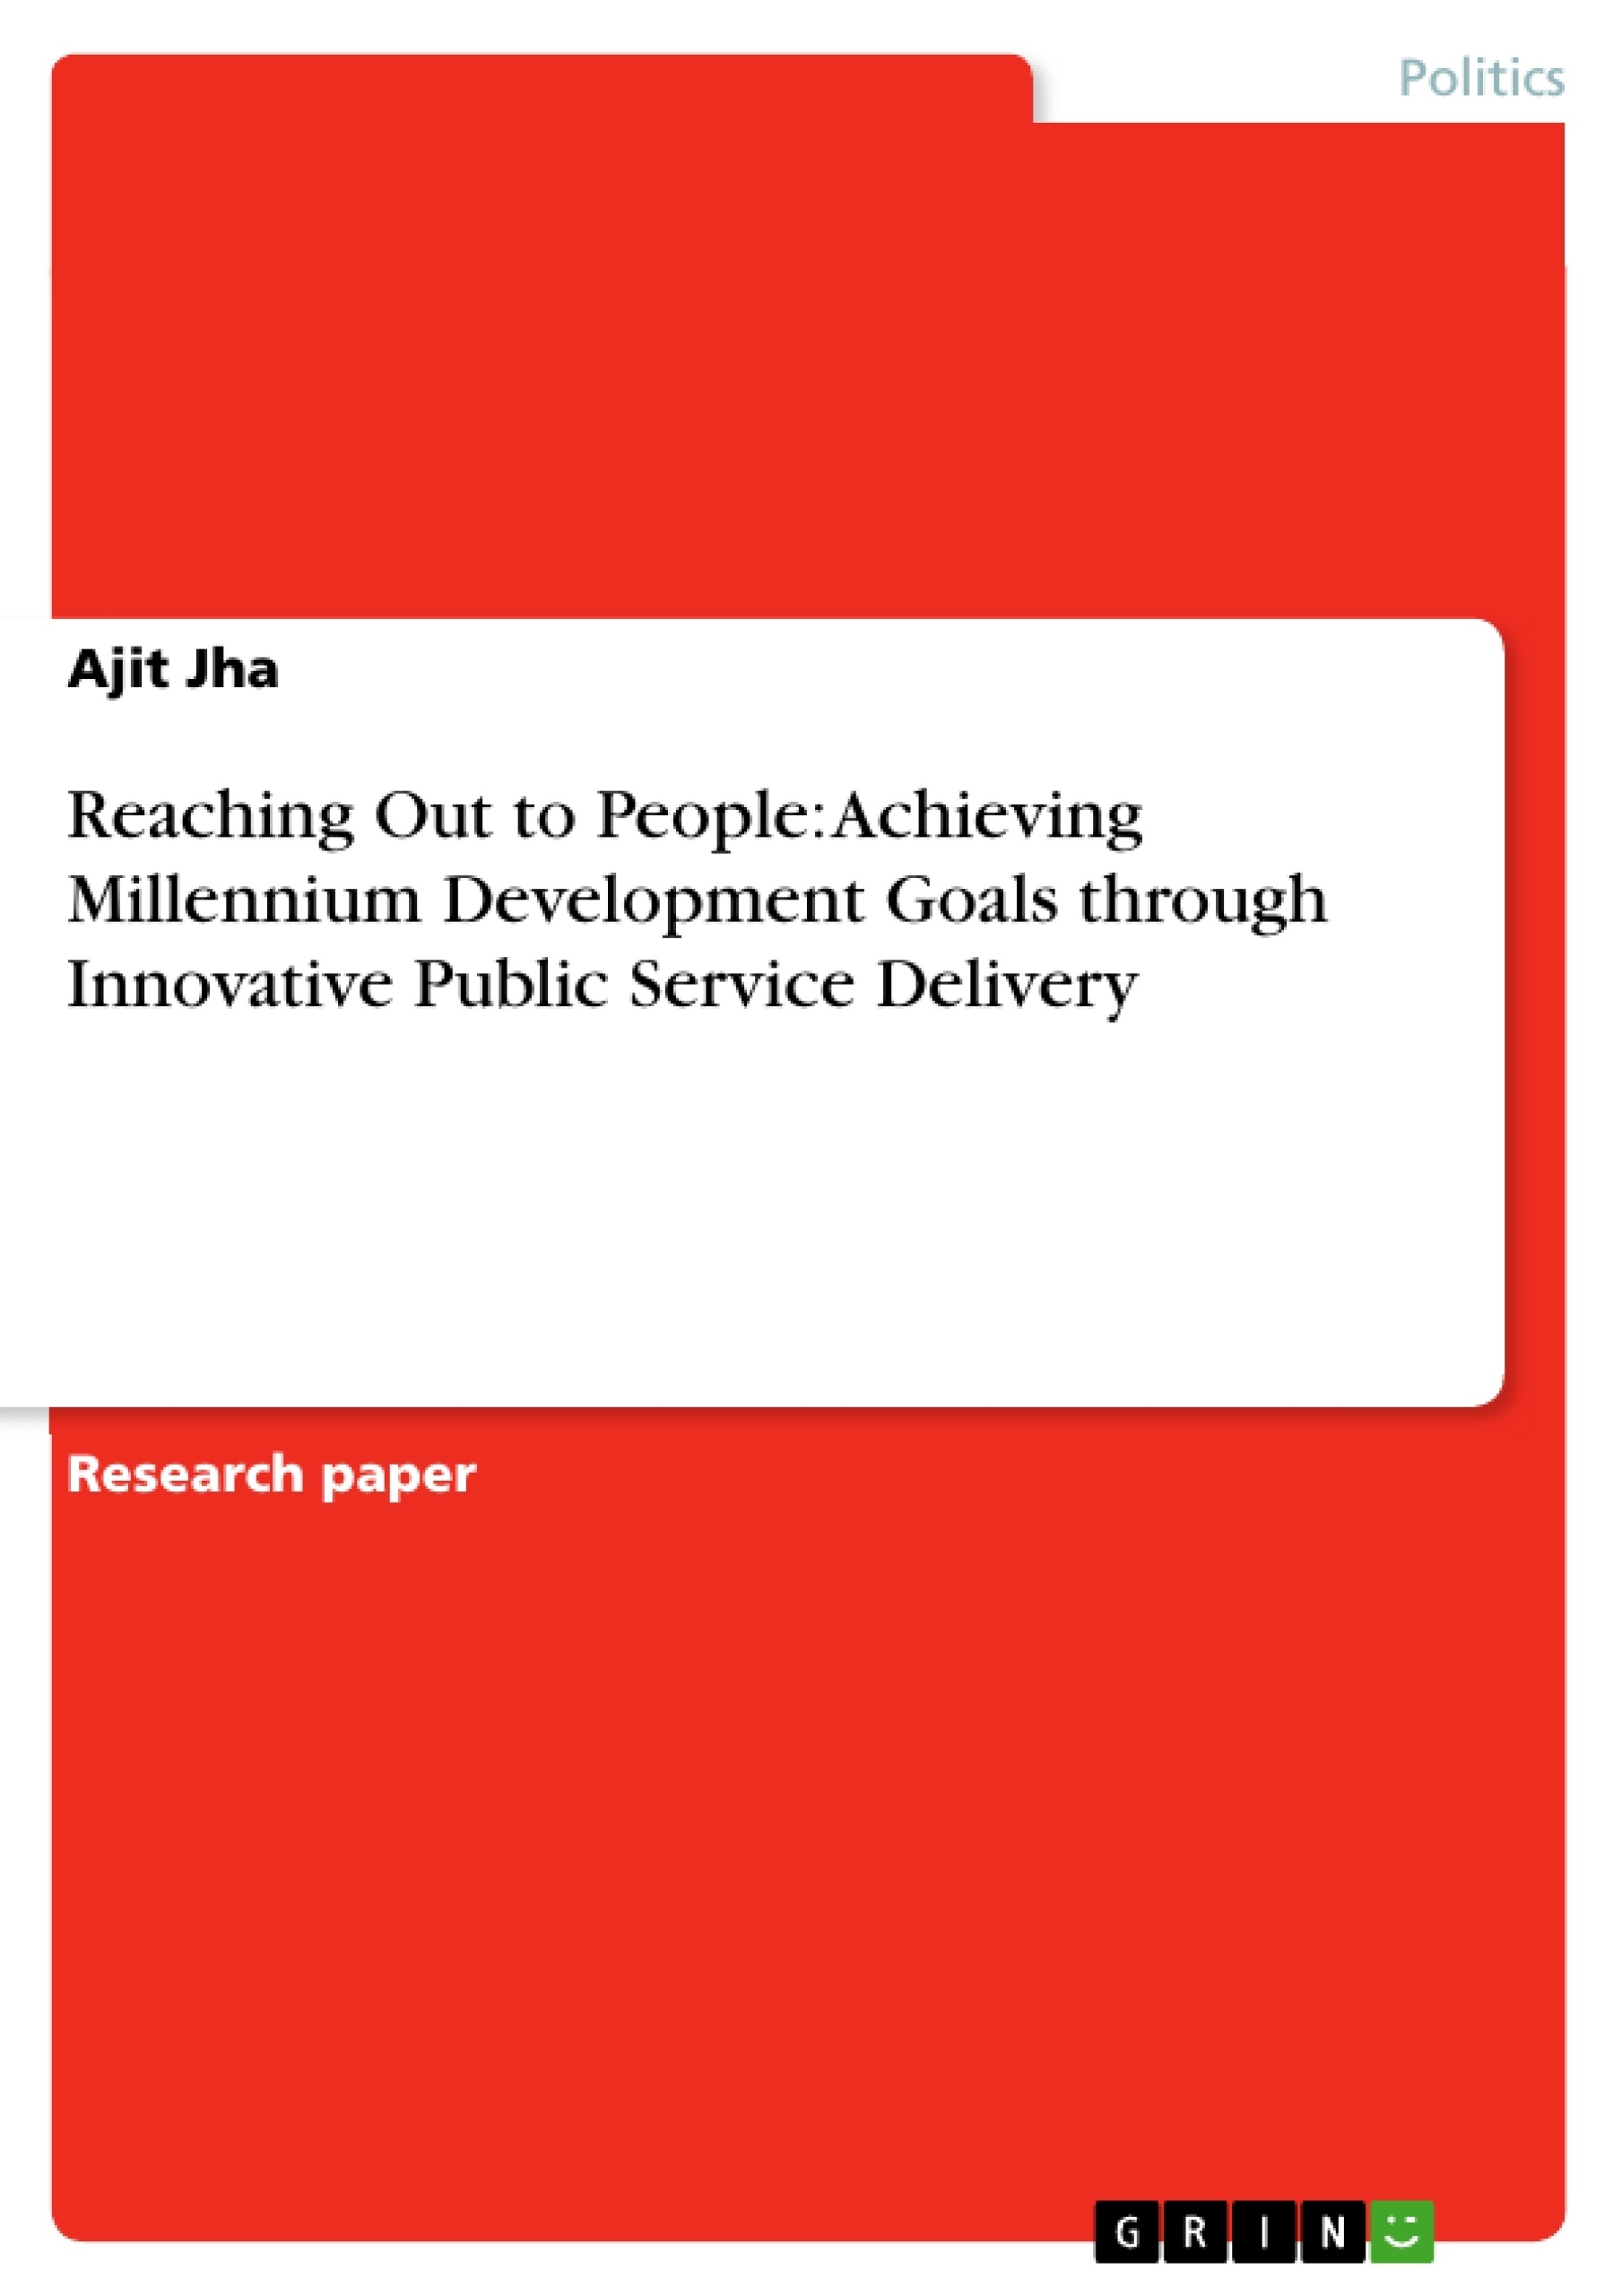 Title: Reaching Out to People: Achieving Millennium Development Goals through Innovative Public Service Delivery